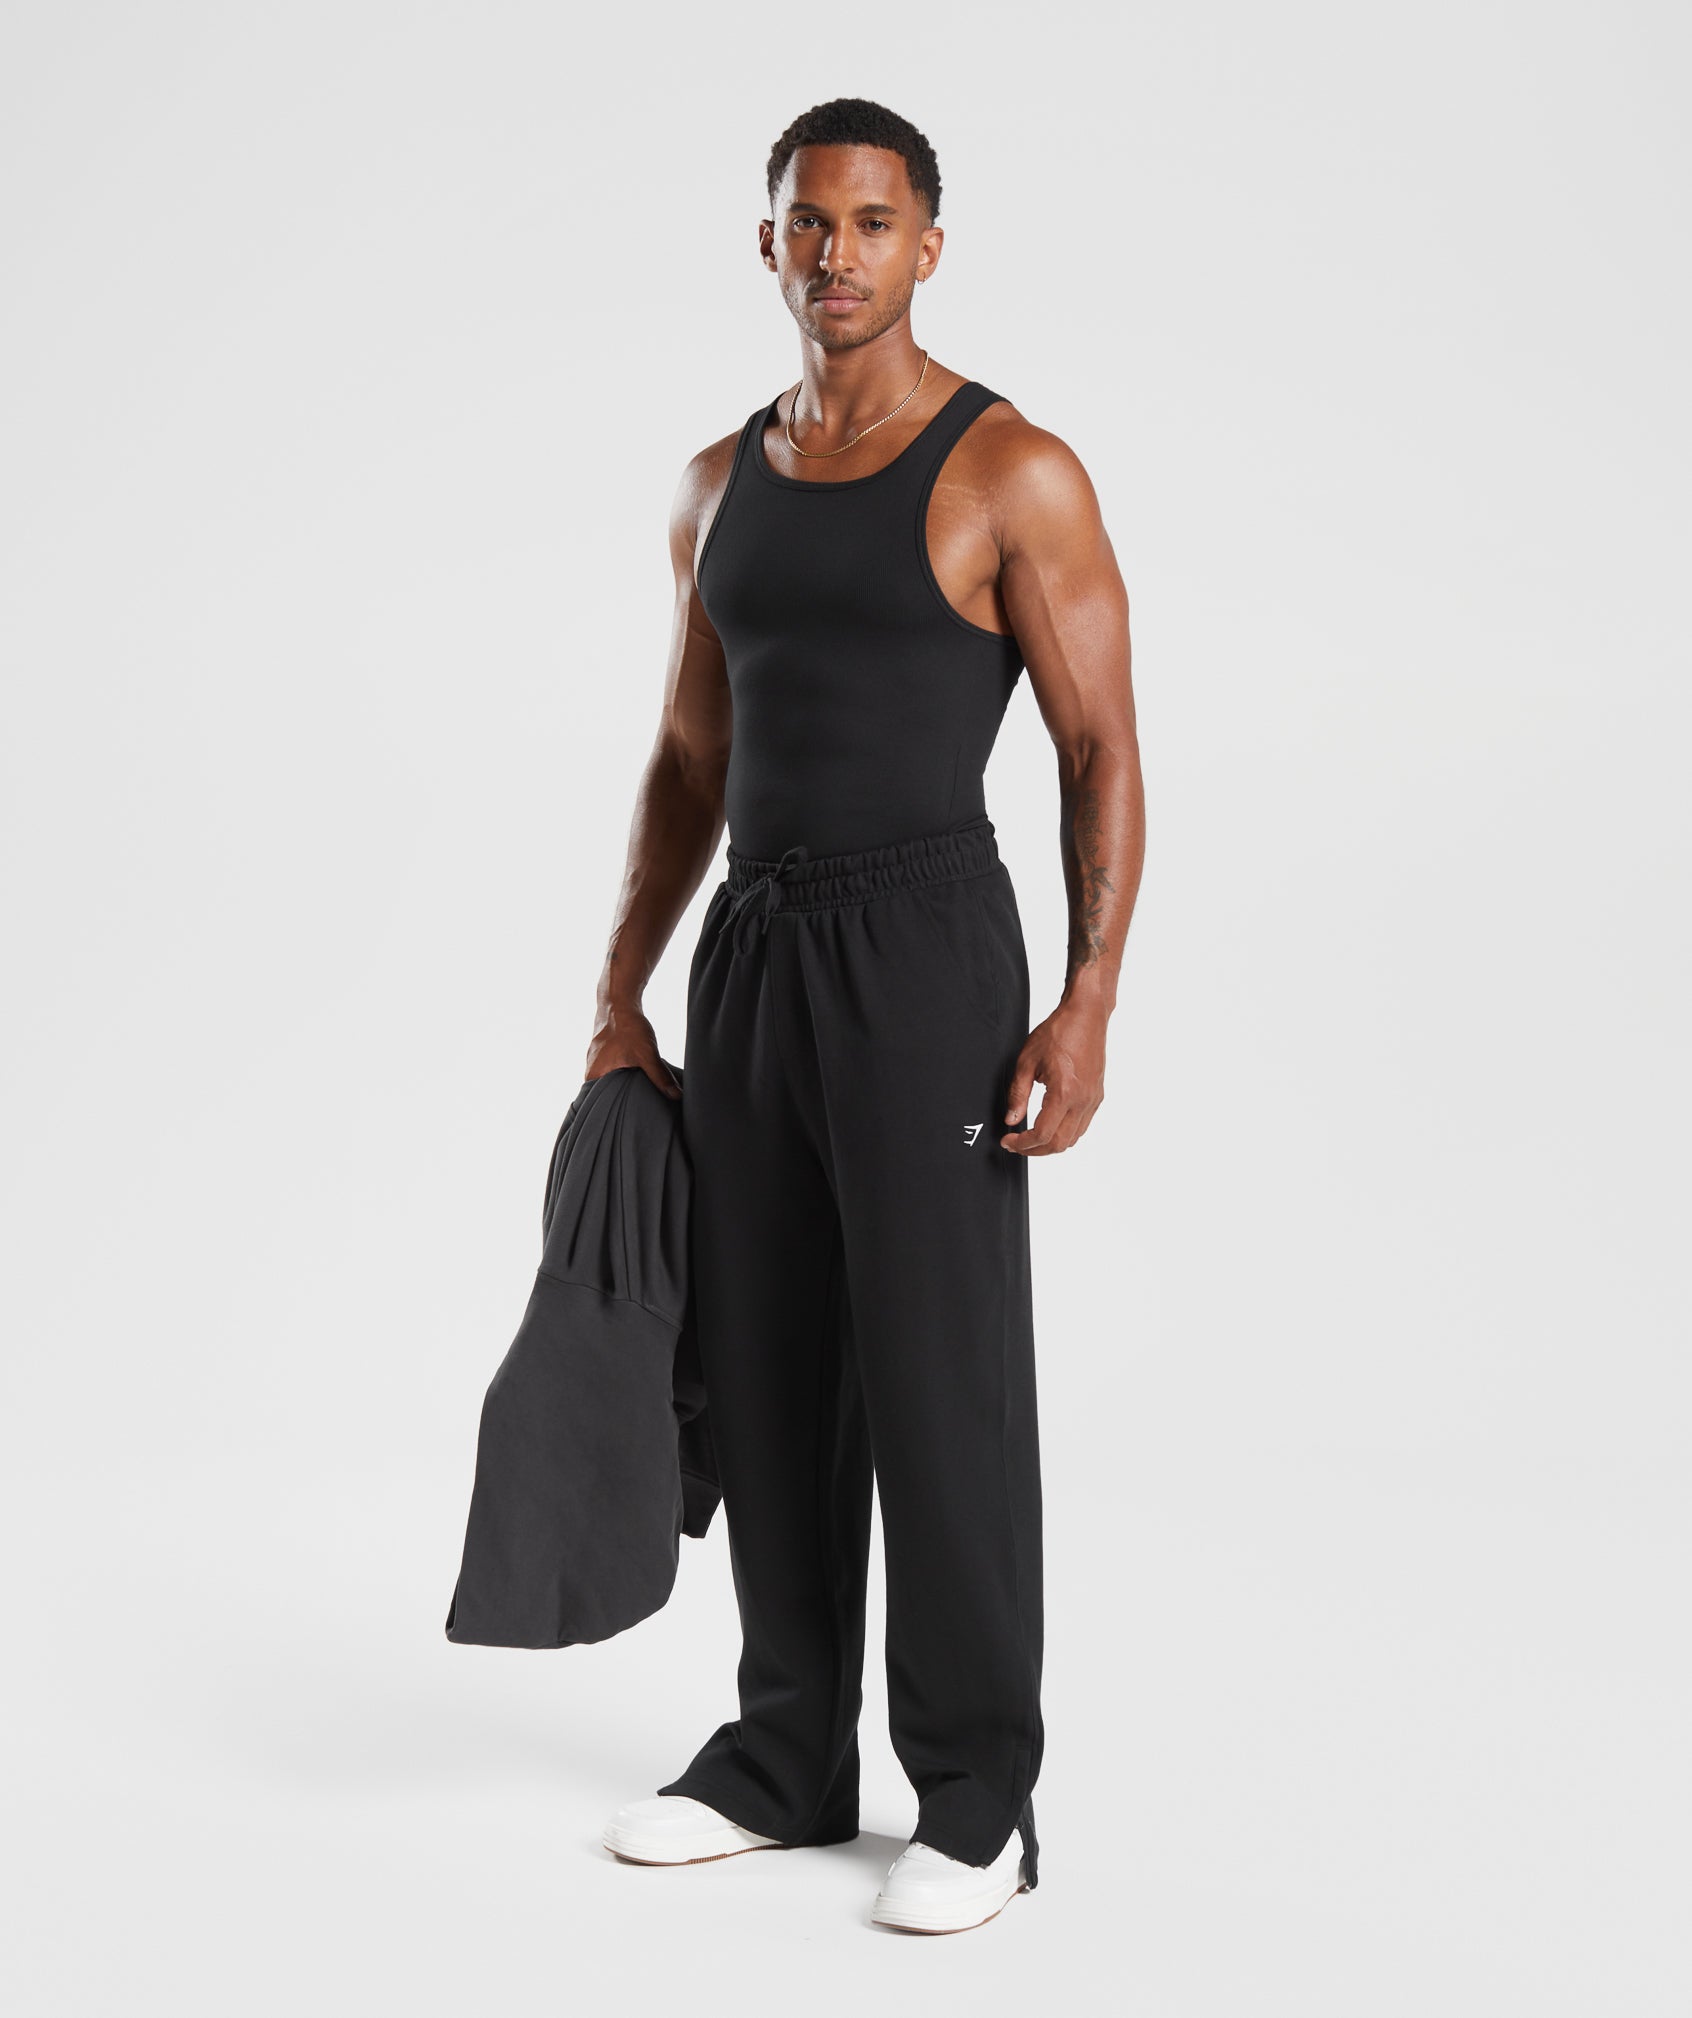 Rest Day Track Pants in Black - view 4